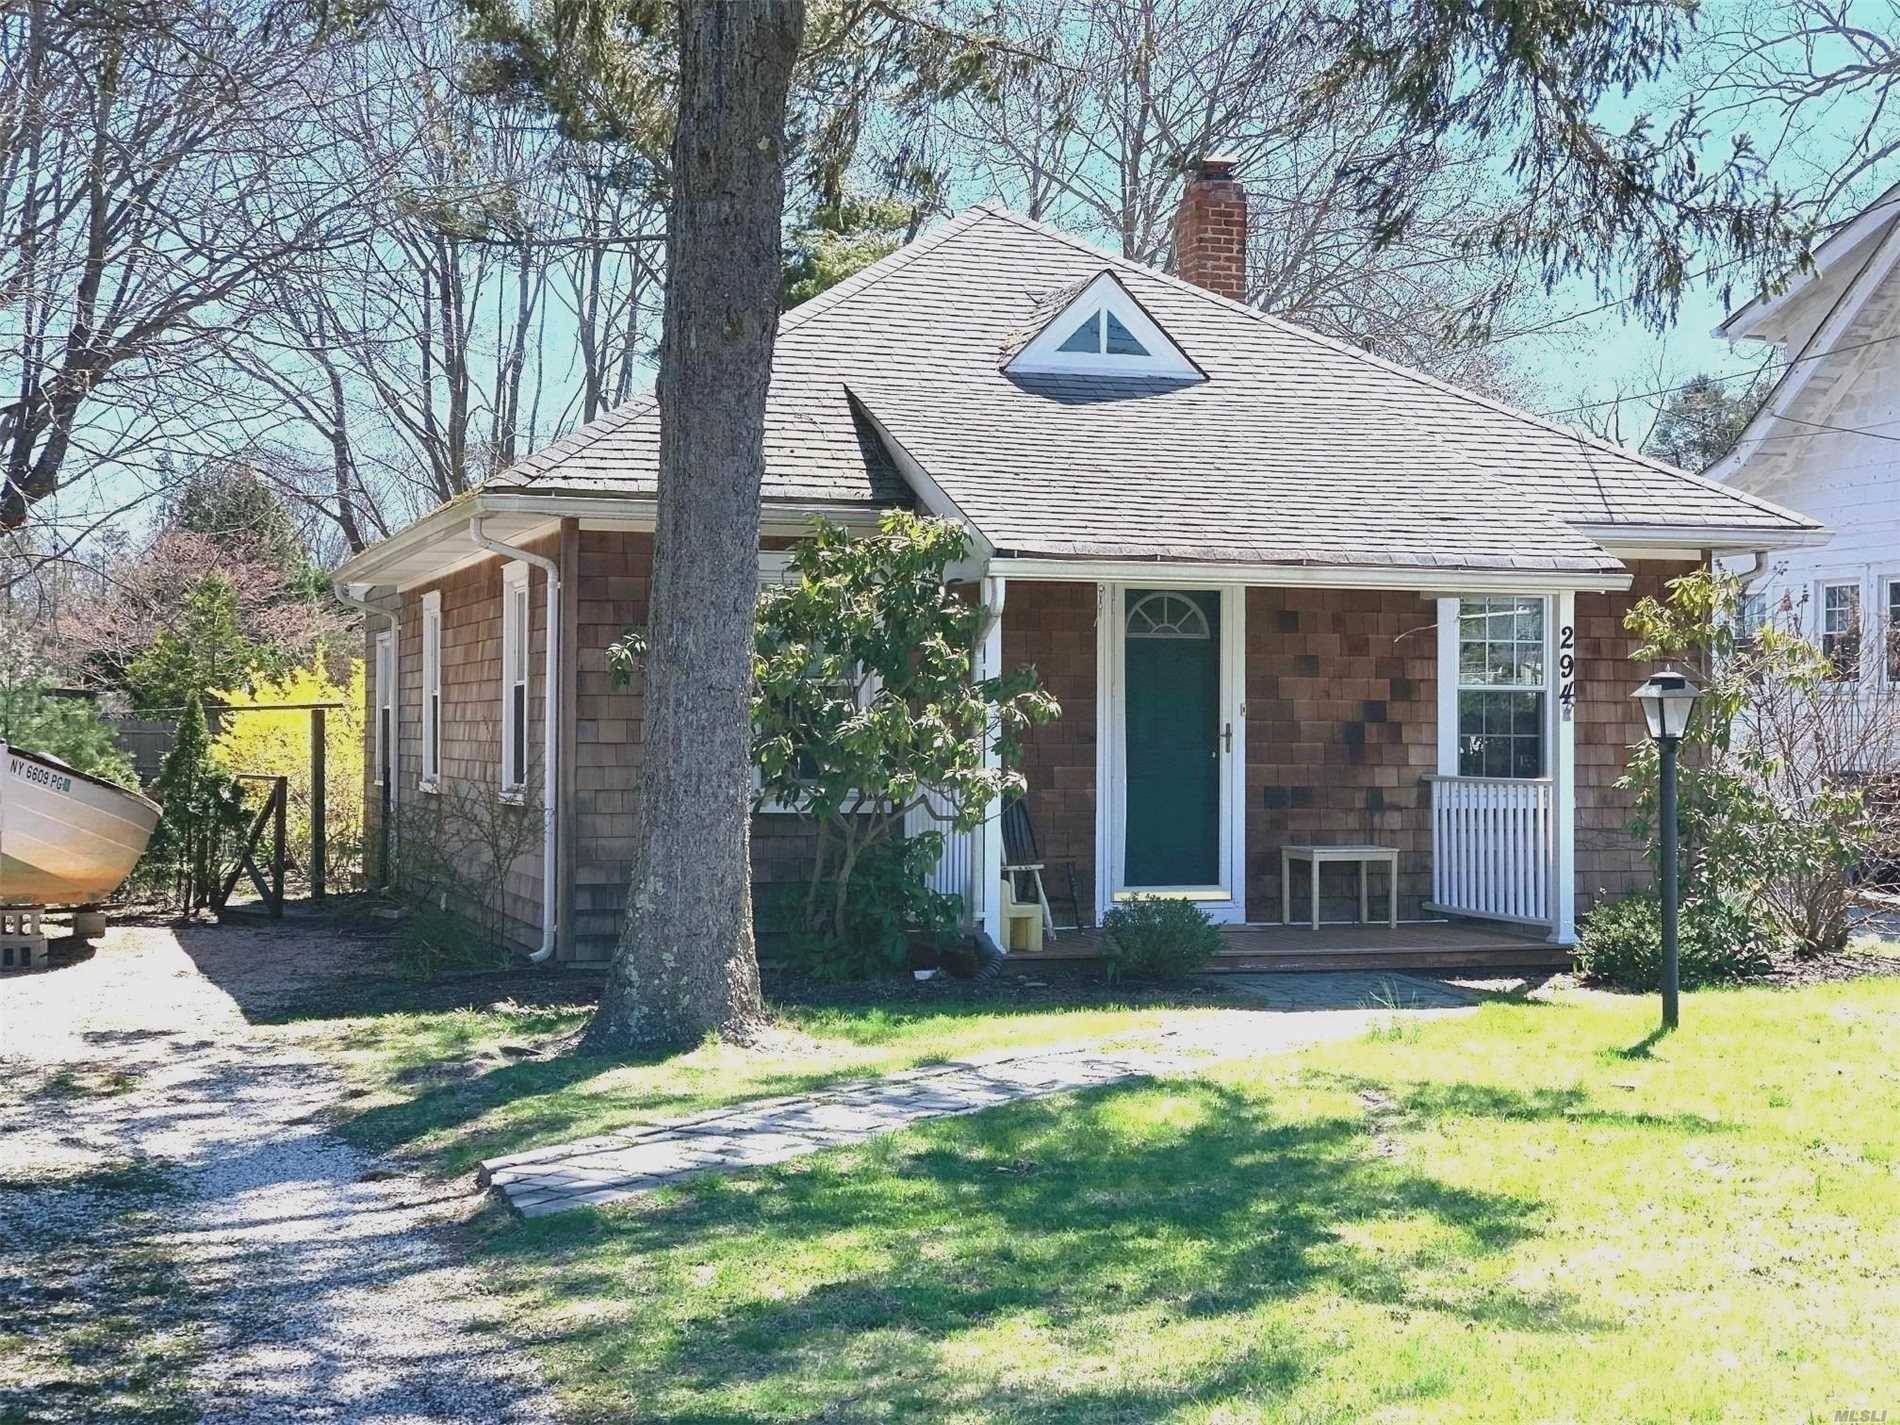 Charming three bedroom cottage in Westhampton Beach, south of the highway.